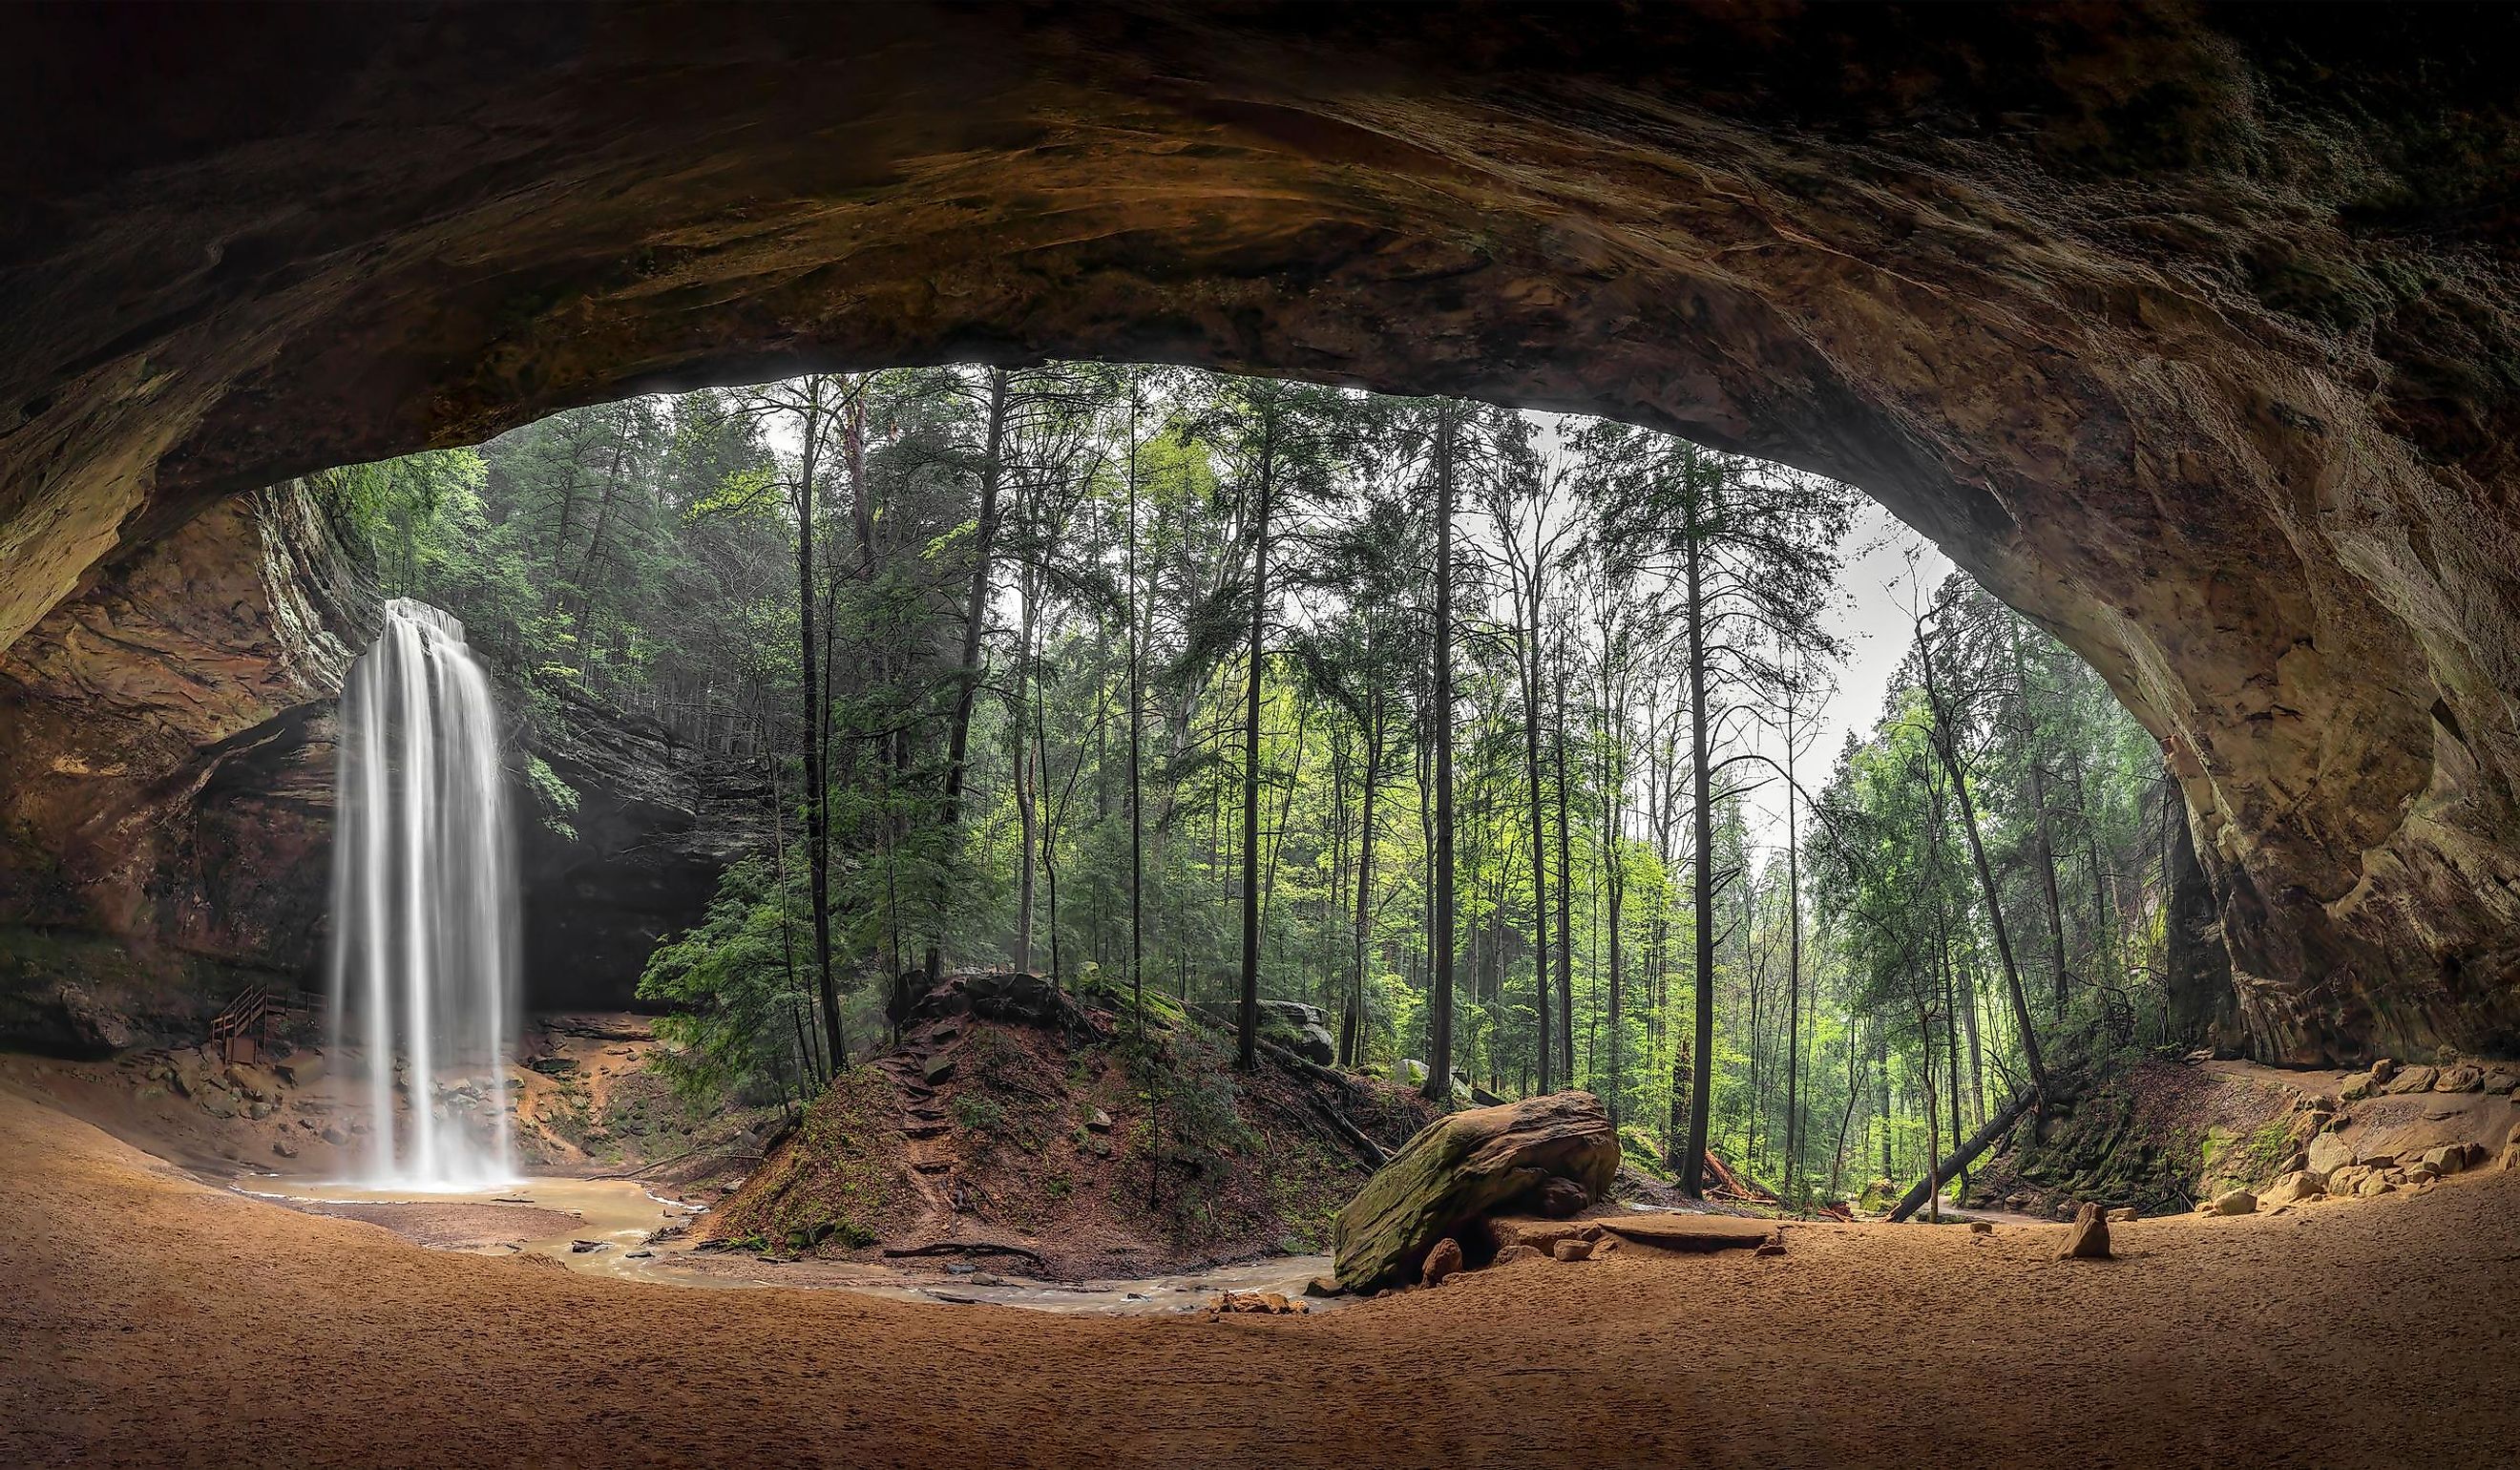 Located in the Hocking Hills of Ohio, Ash Cave is an enormous sandstone recess cave adorned with a beautiful waterfall after spring rains.